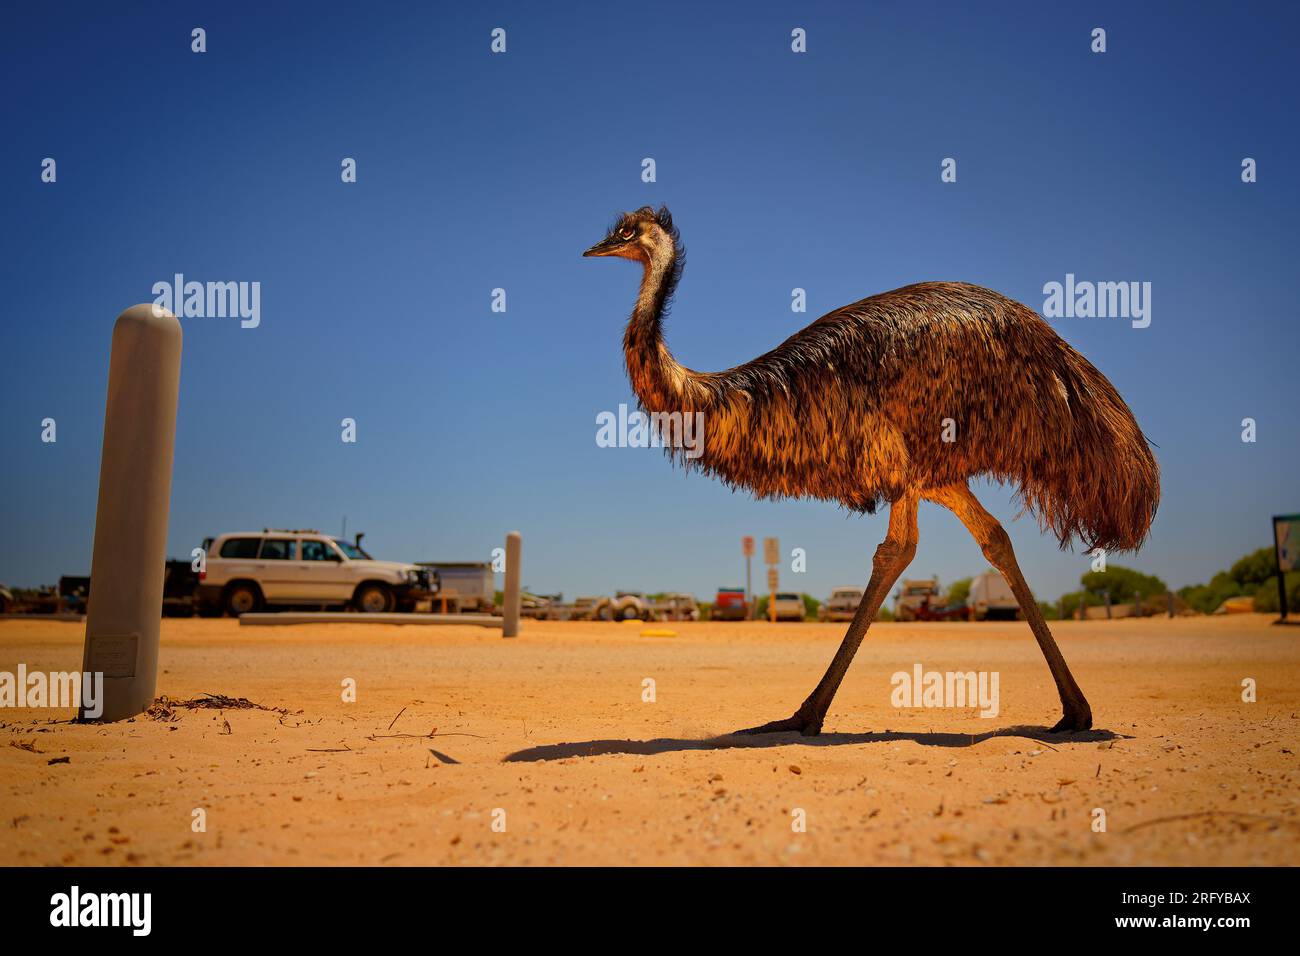 Big Emu walks in parking place with the car in back - Dromaius novaehollandiae second-tallest living bird after its ratite relative the ostrich, endem Stock Photo